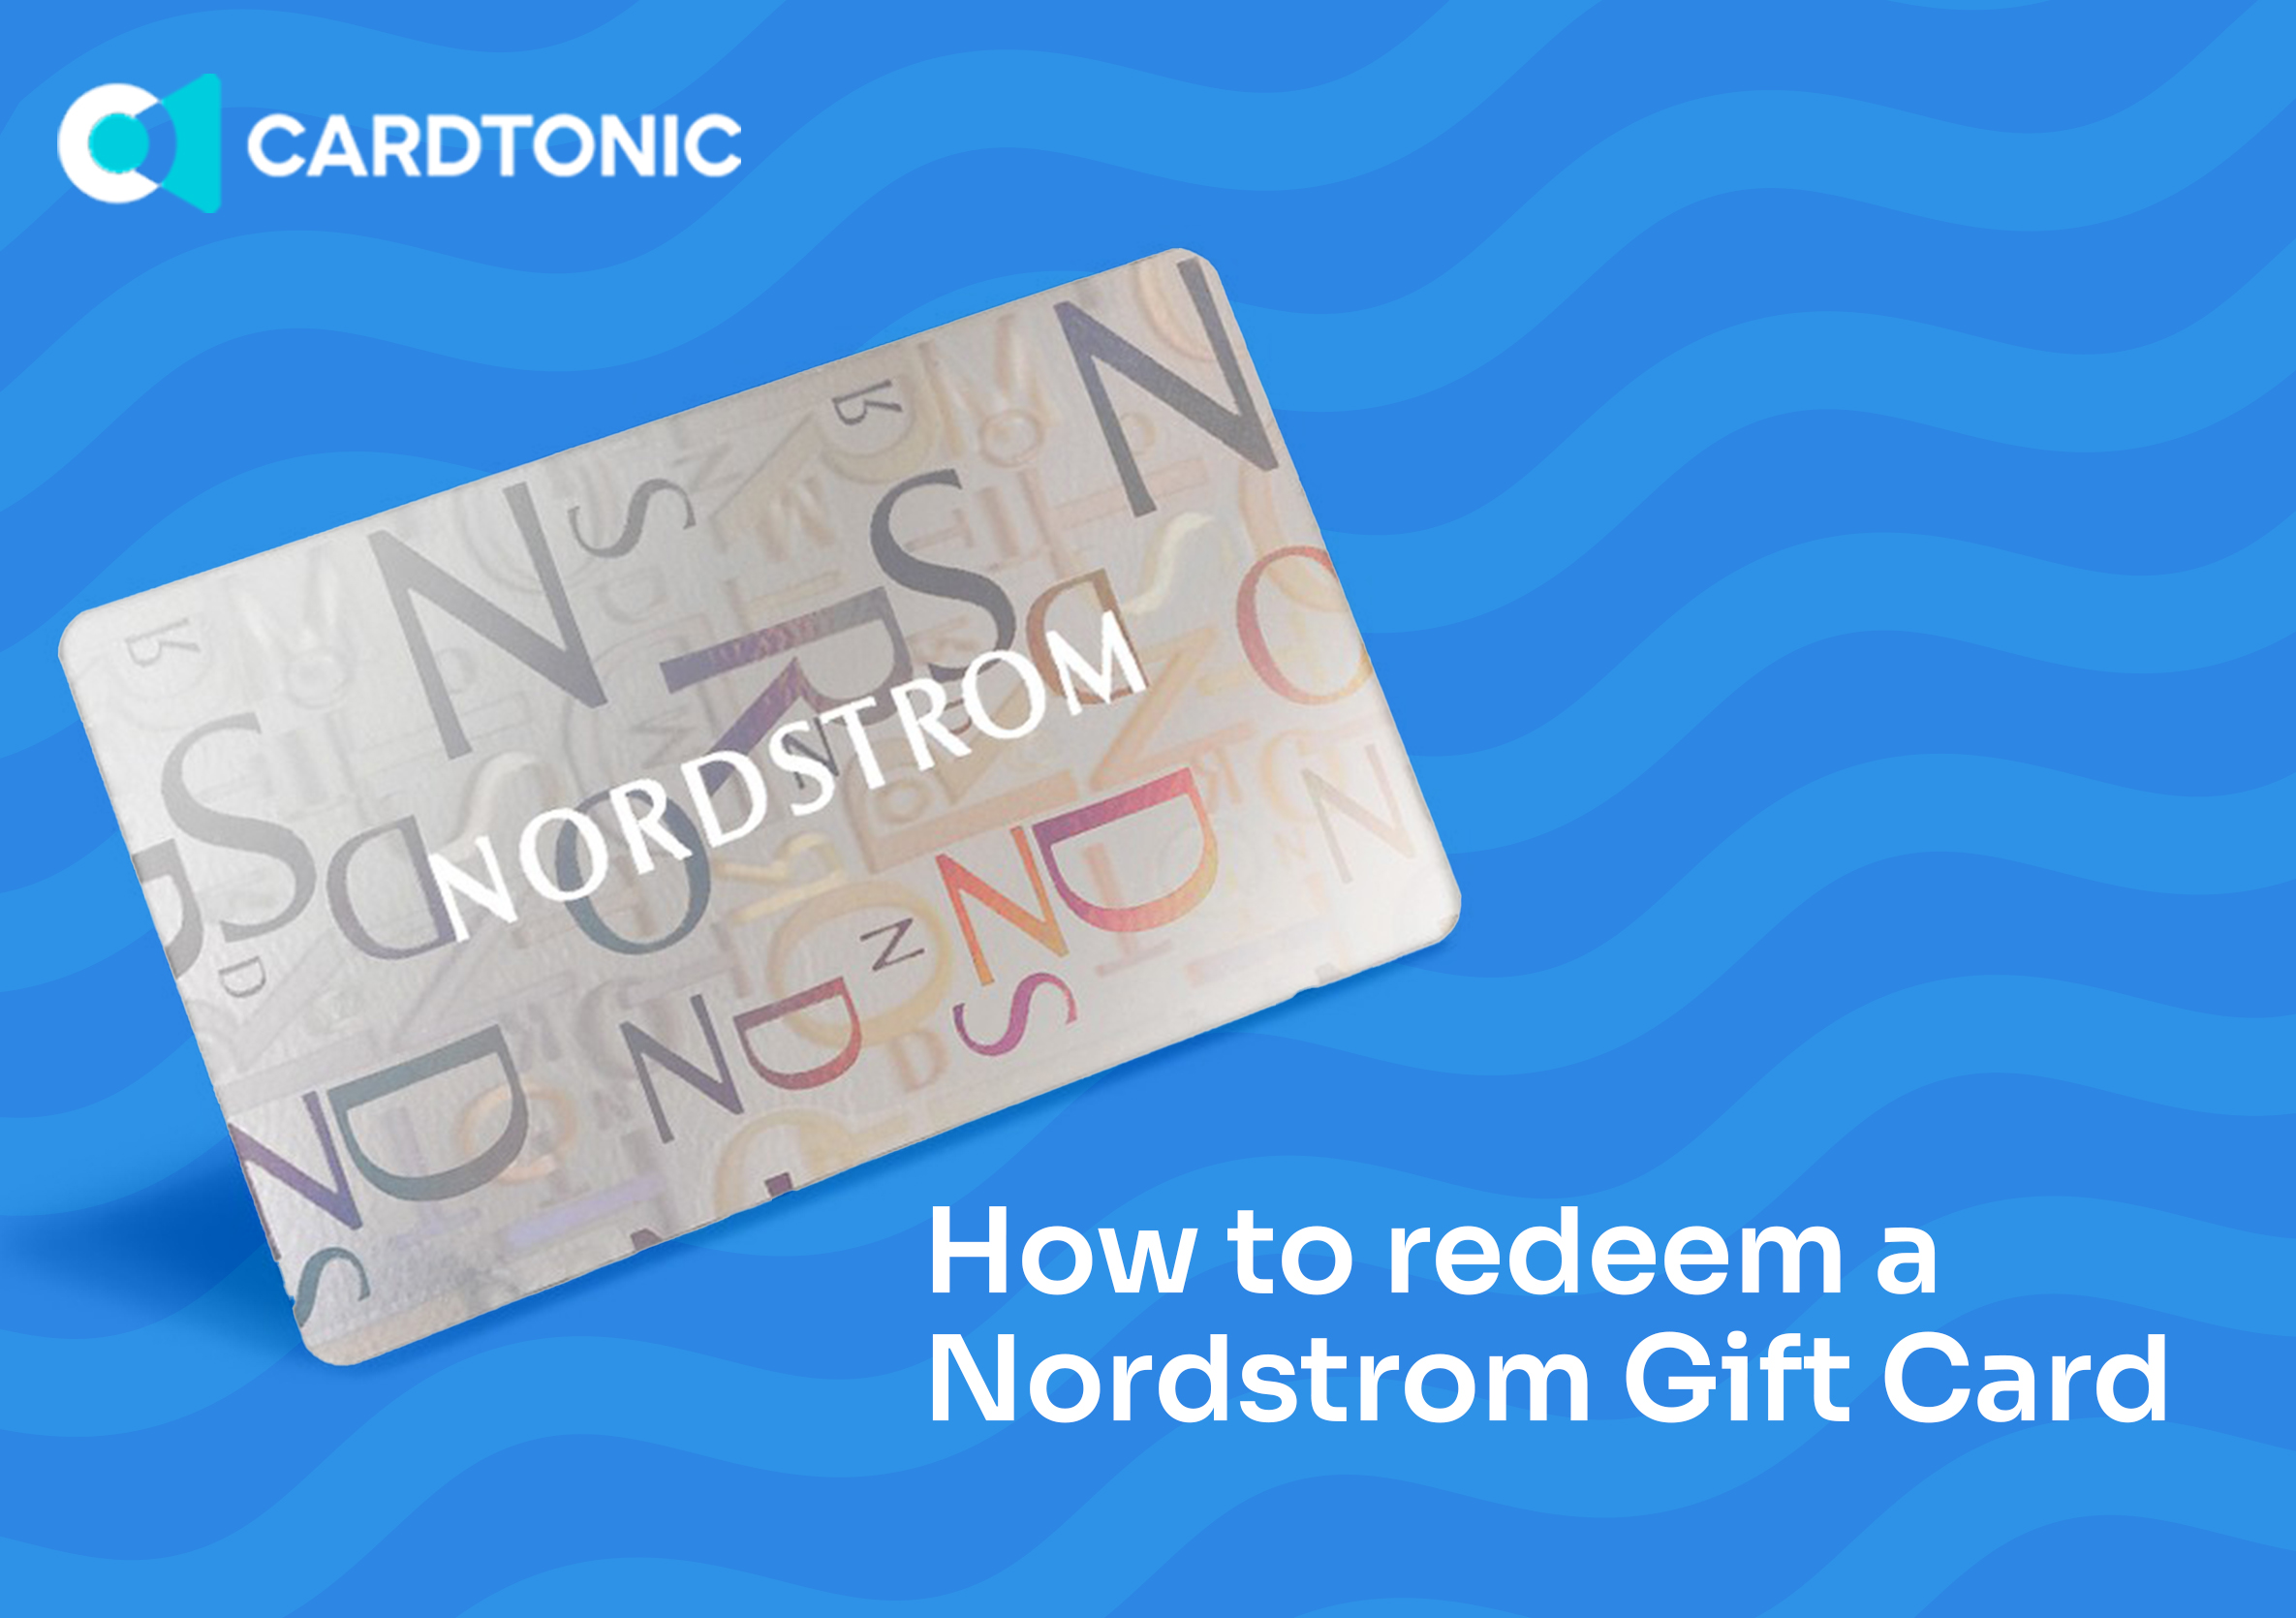 1. How to Sell Nordstrom Gift cards in Nigeria - GiftCards Hub